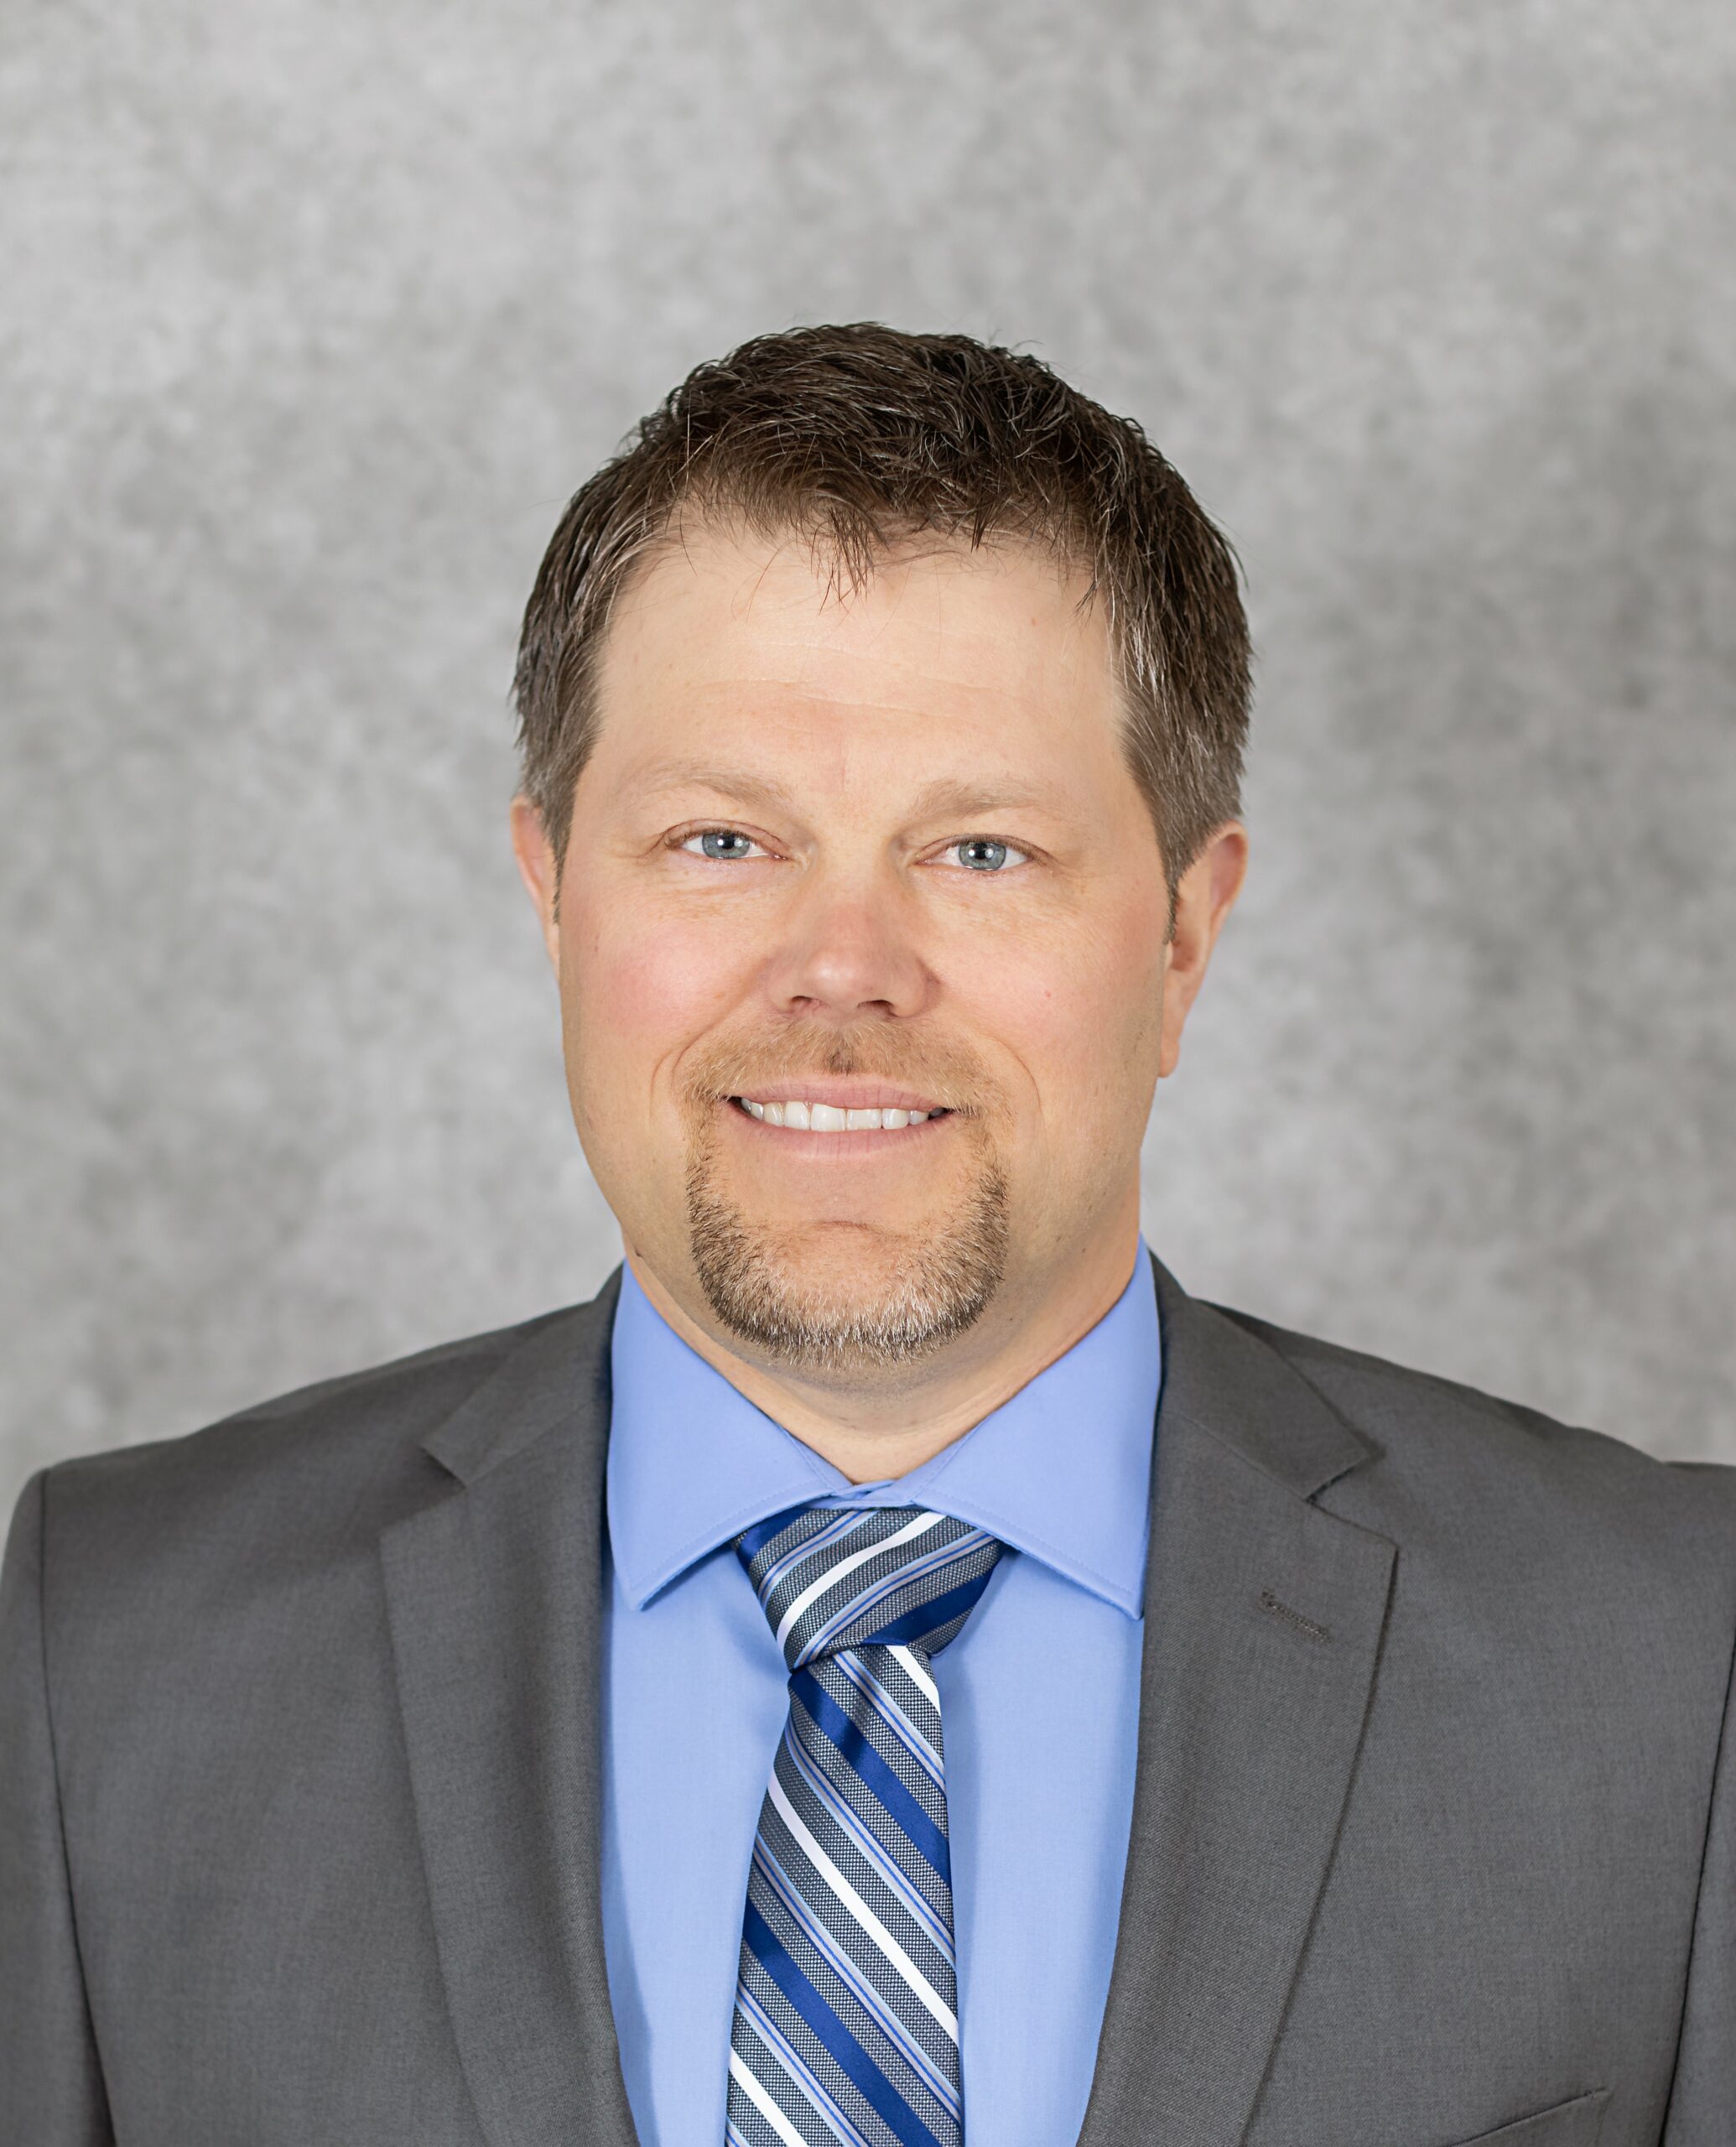 A headshot of a white man with brown hair and goatee in a suit and tie.